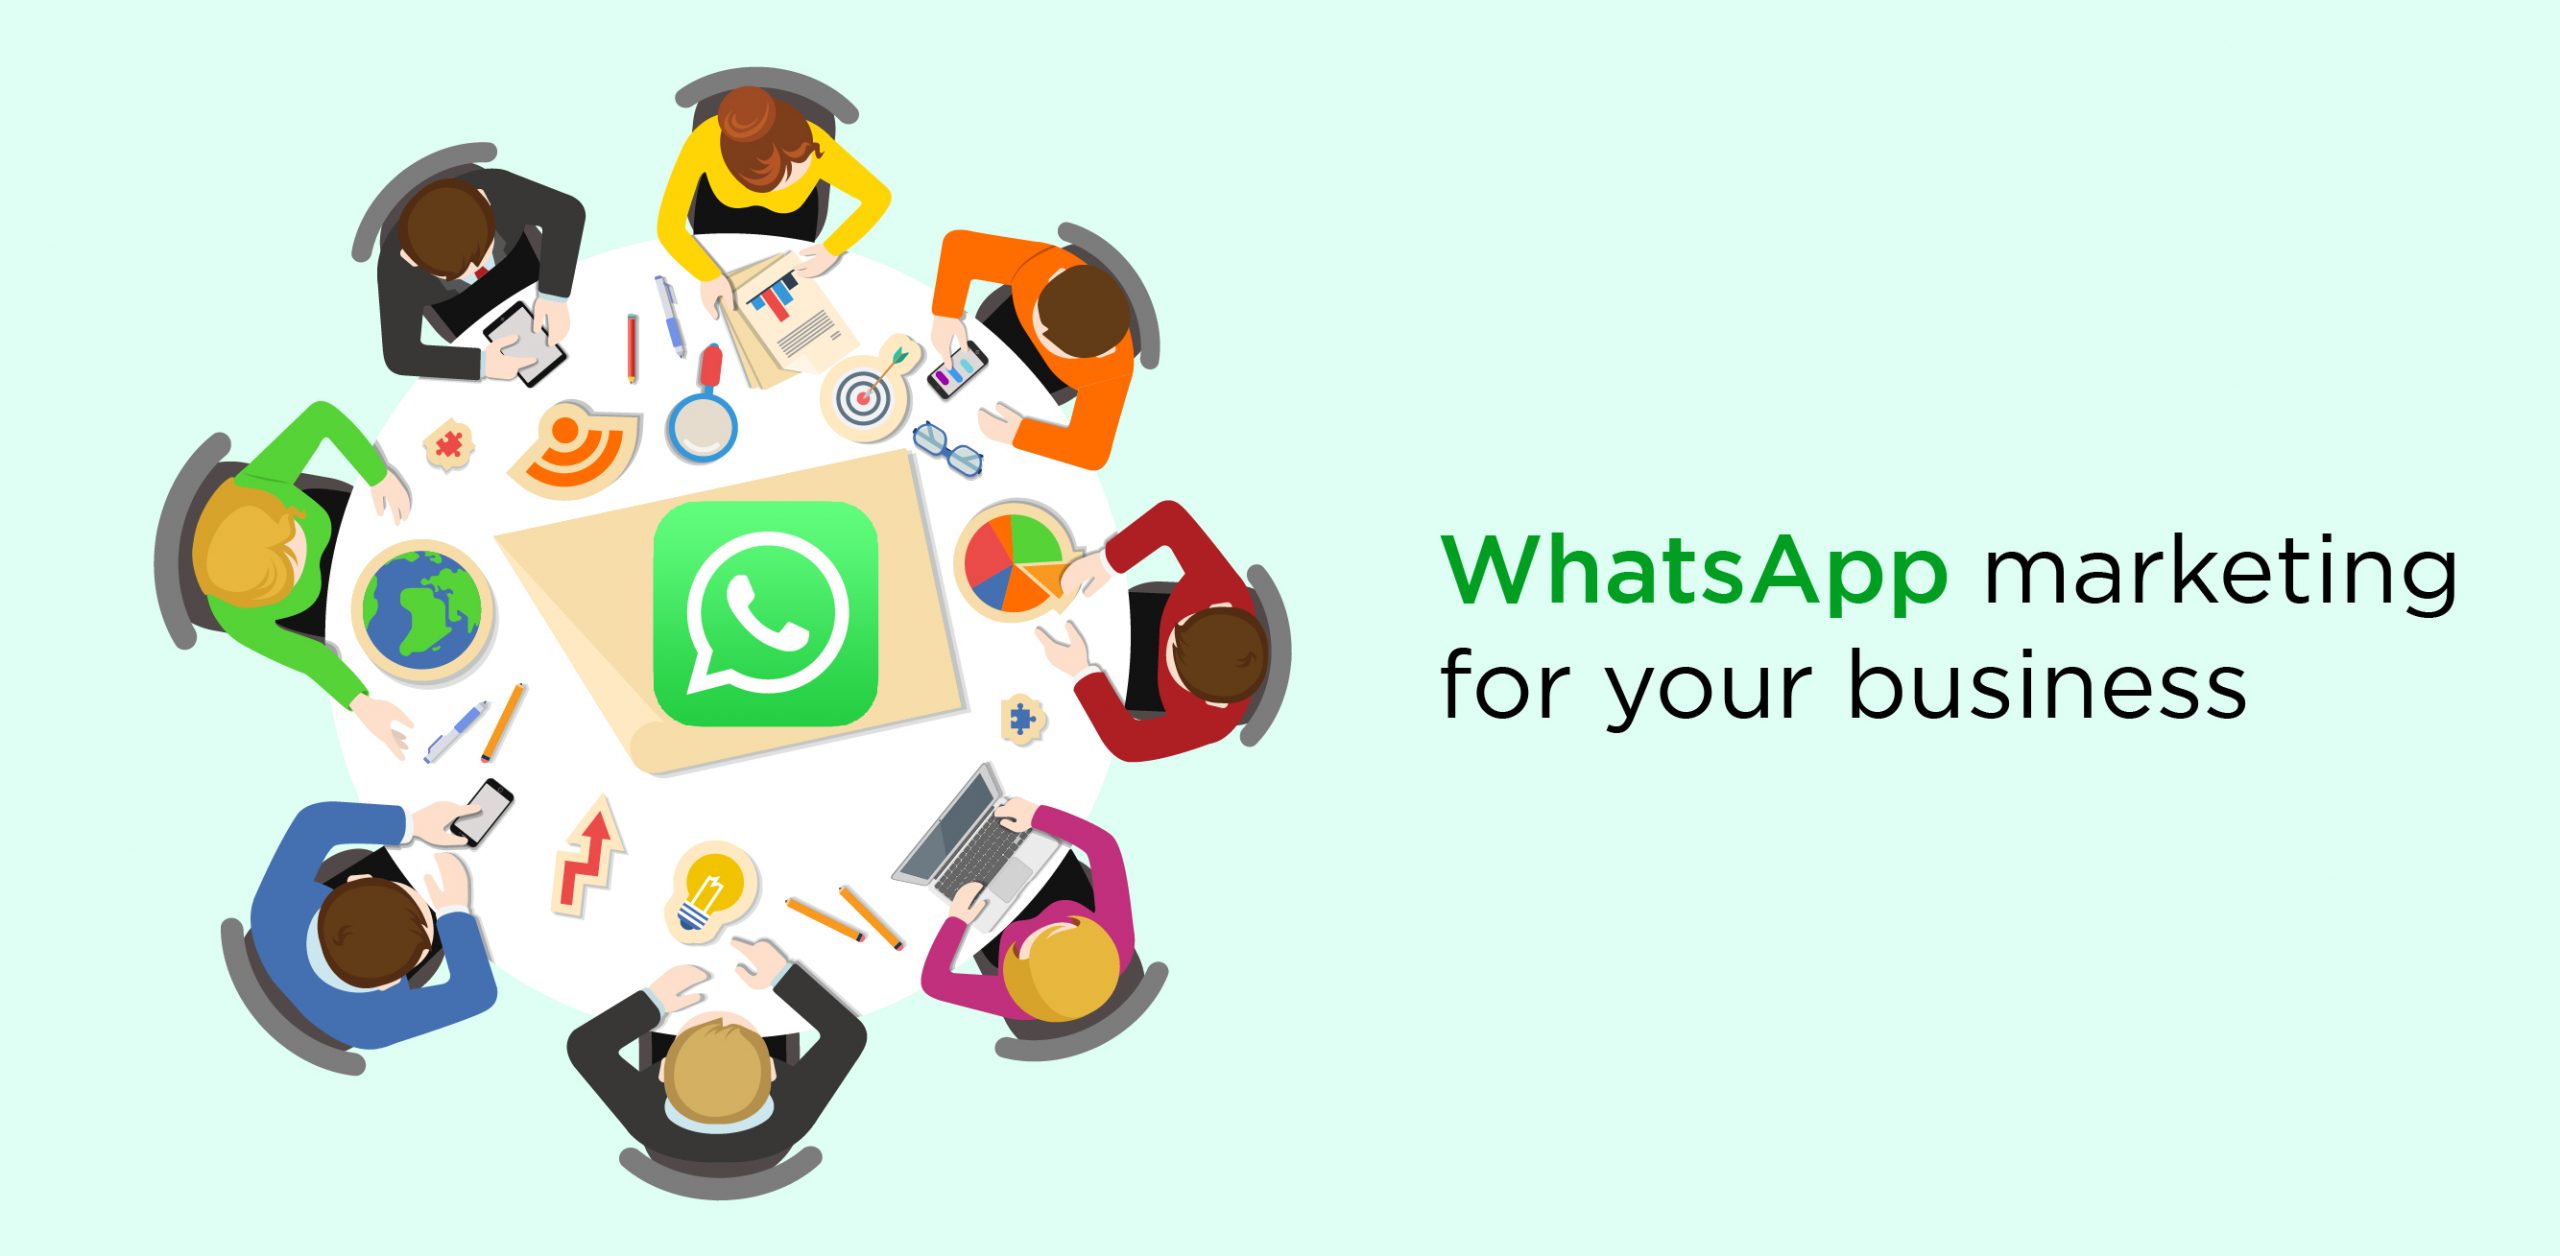 Why should you use WhatsApp marketing for your business?